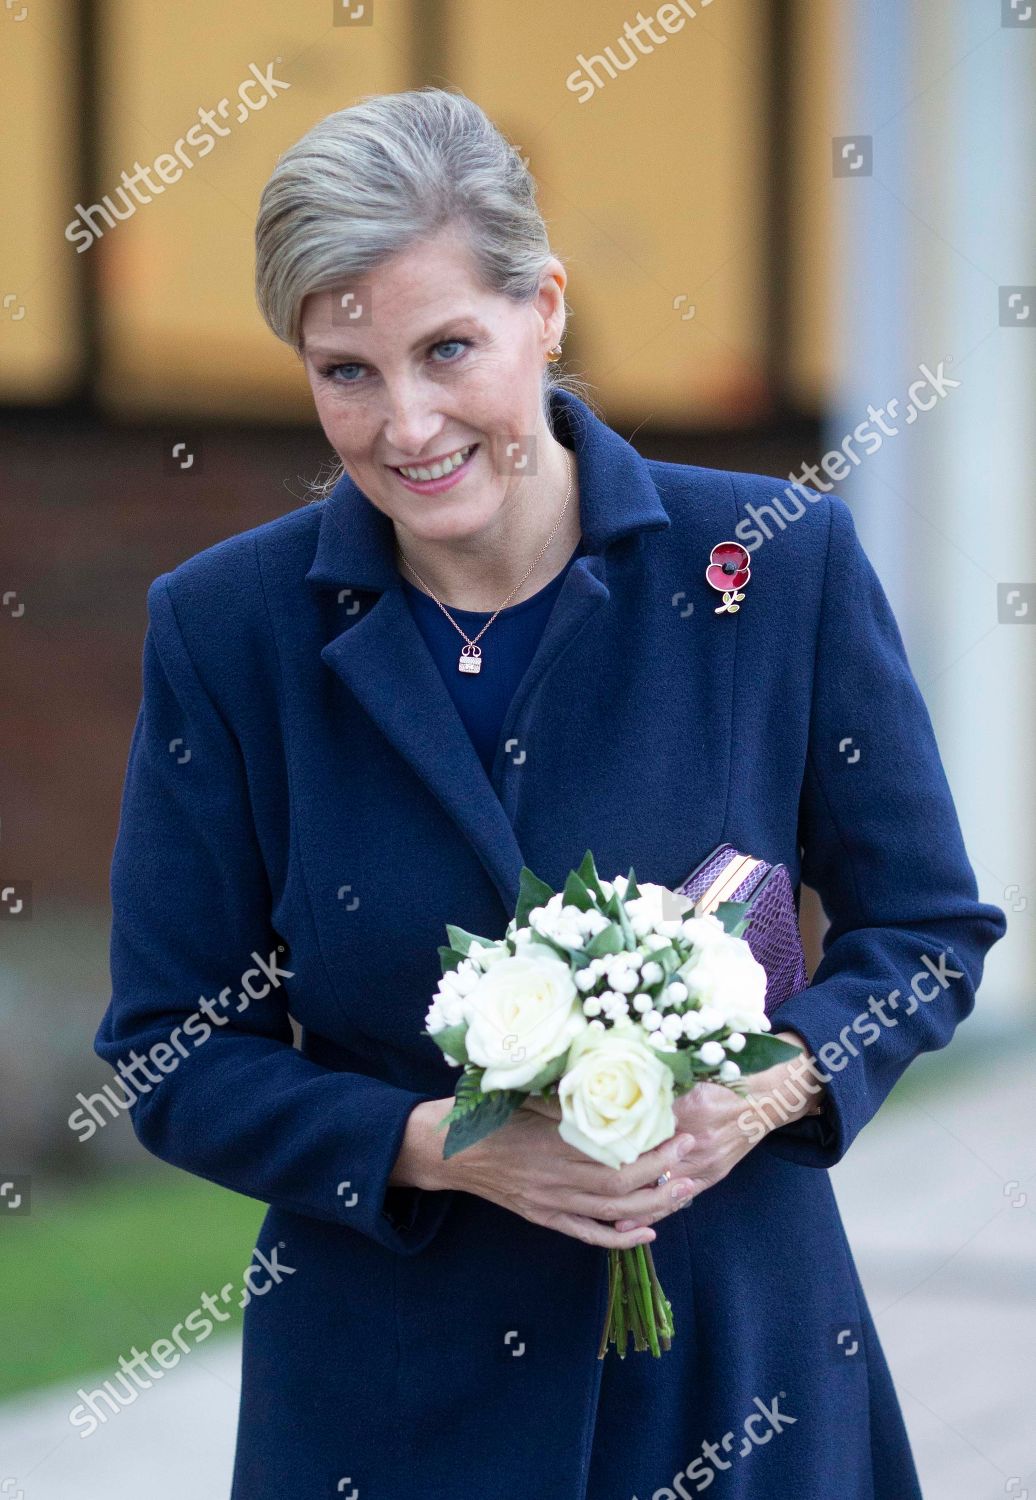 sophie-countess-of-wessex-opens-the-thames-valley-air-ambulance-headquarters-stokenchurch-buckinghamshire-uk-shutterstock-editorial-9968468ag.jpg